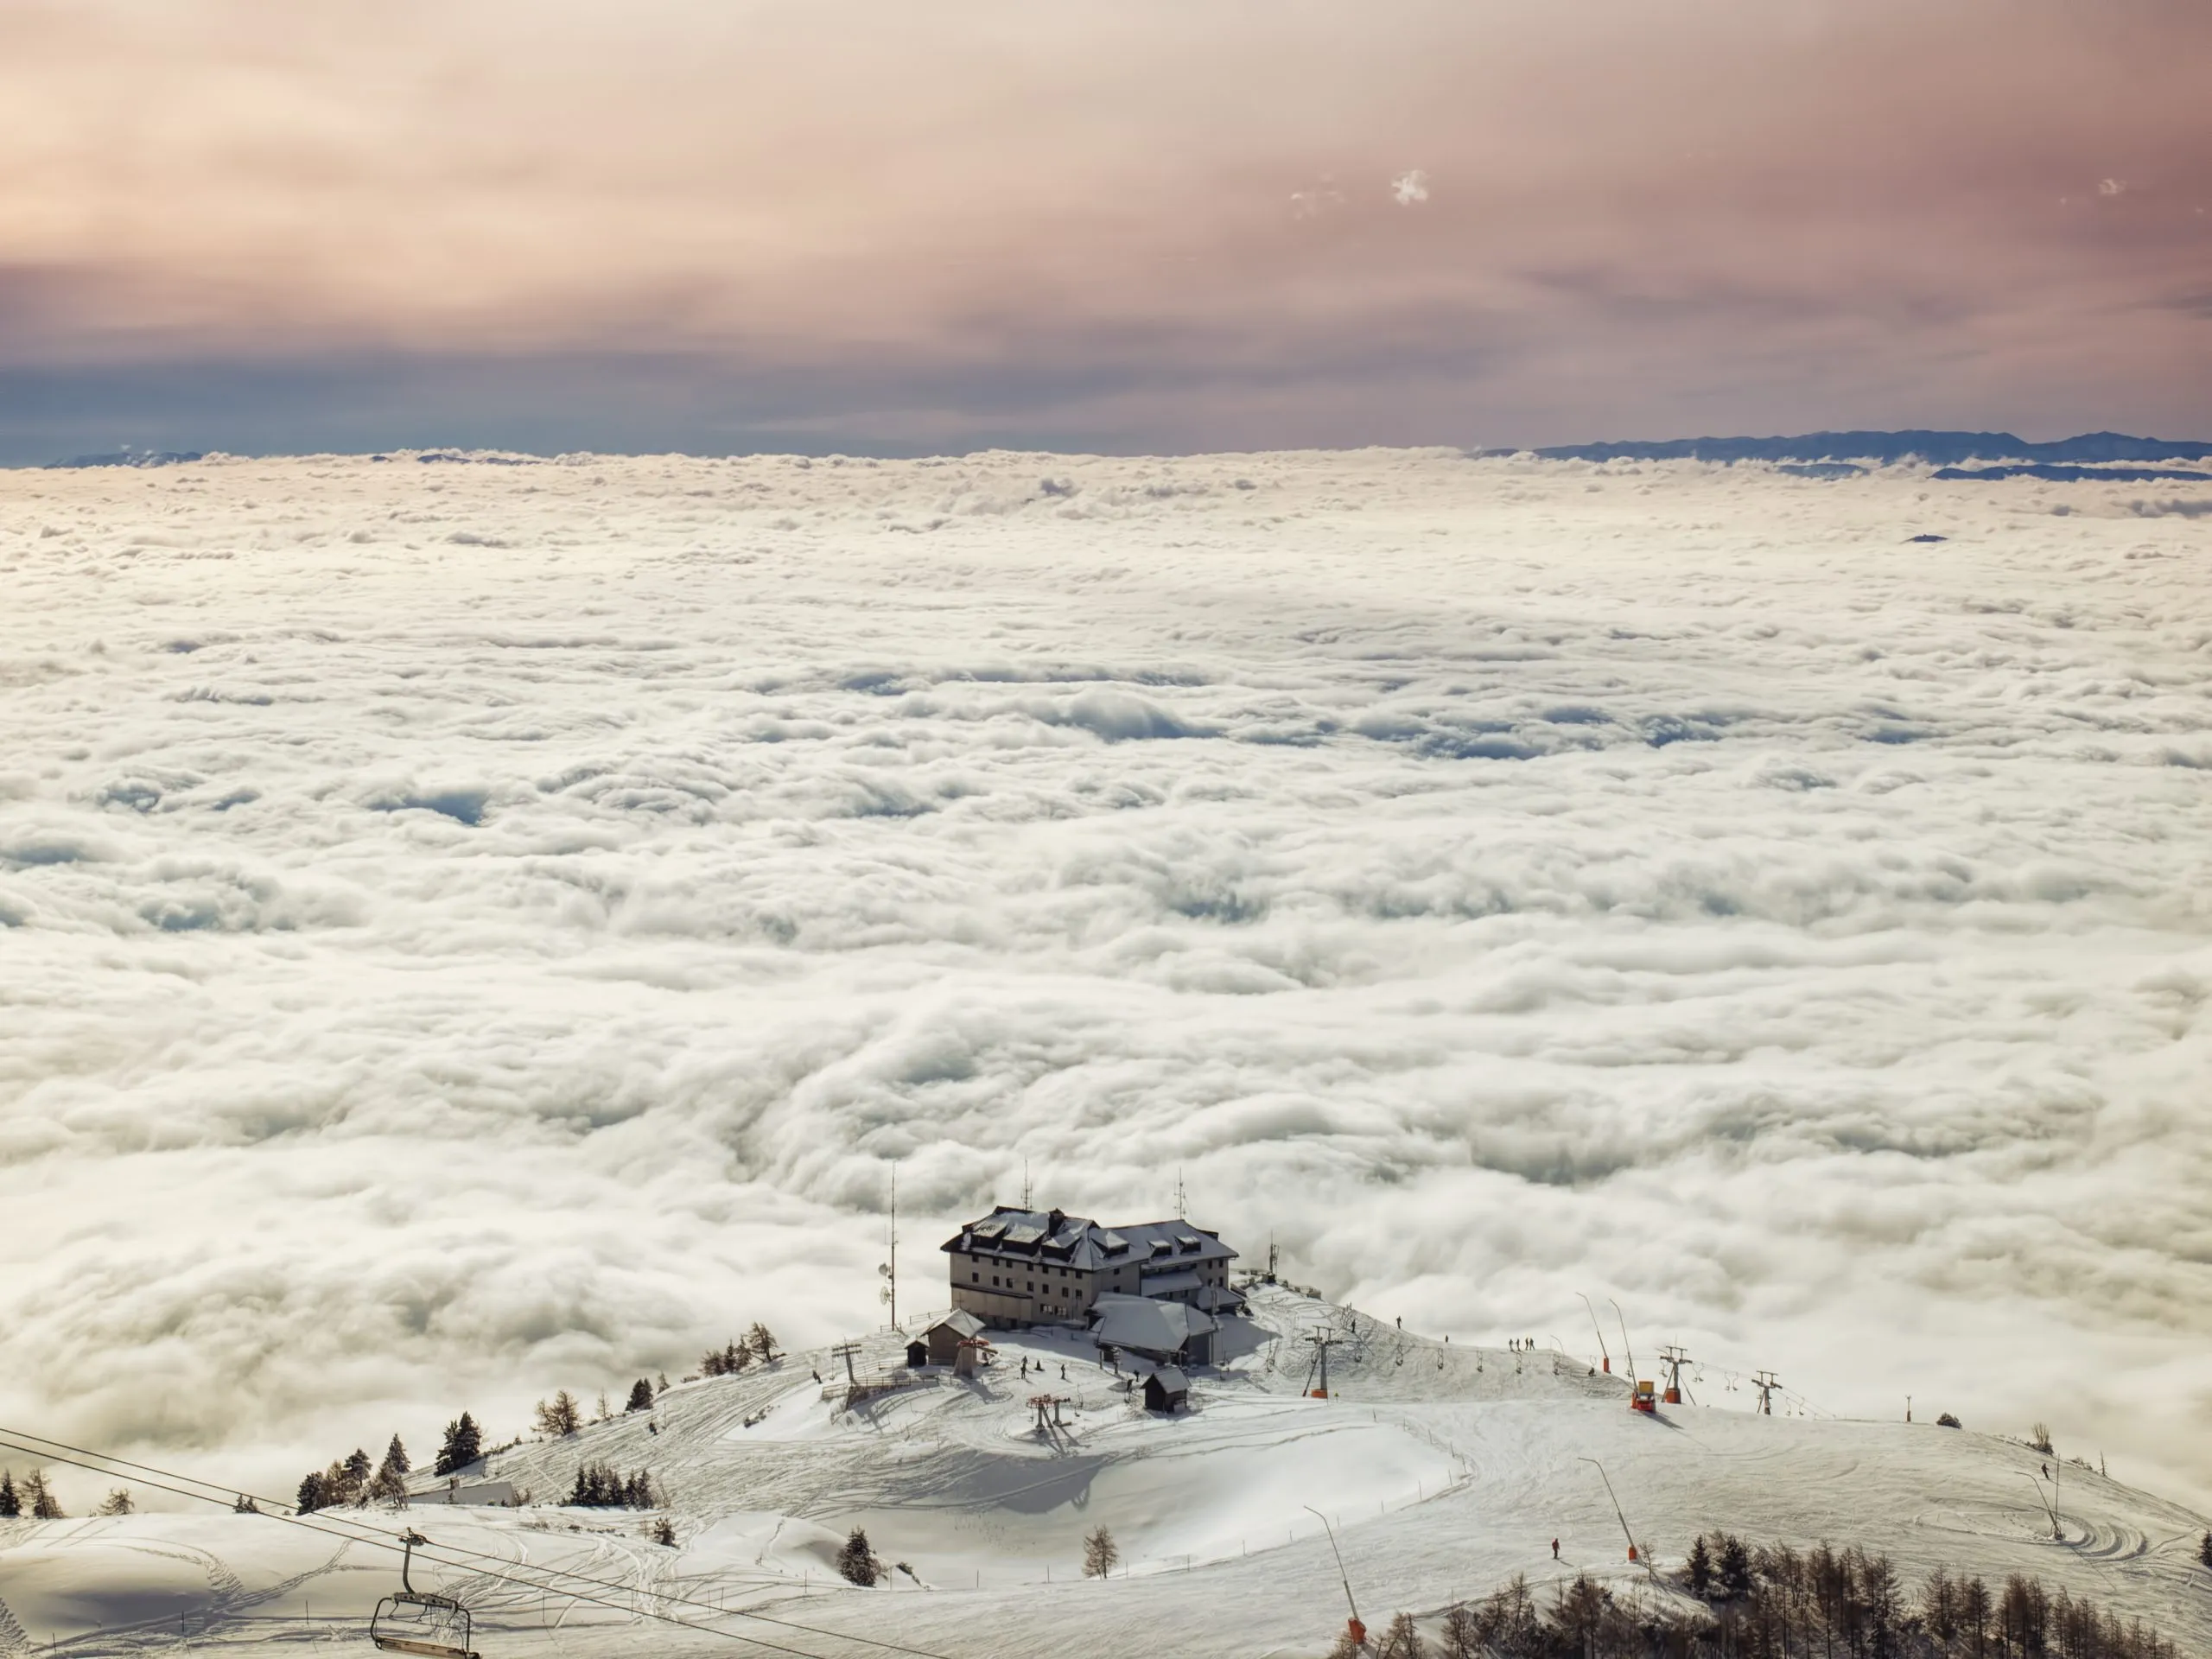 Krvavec ski resort above a sea of clouds